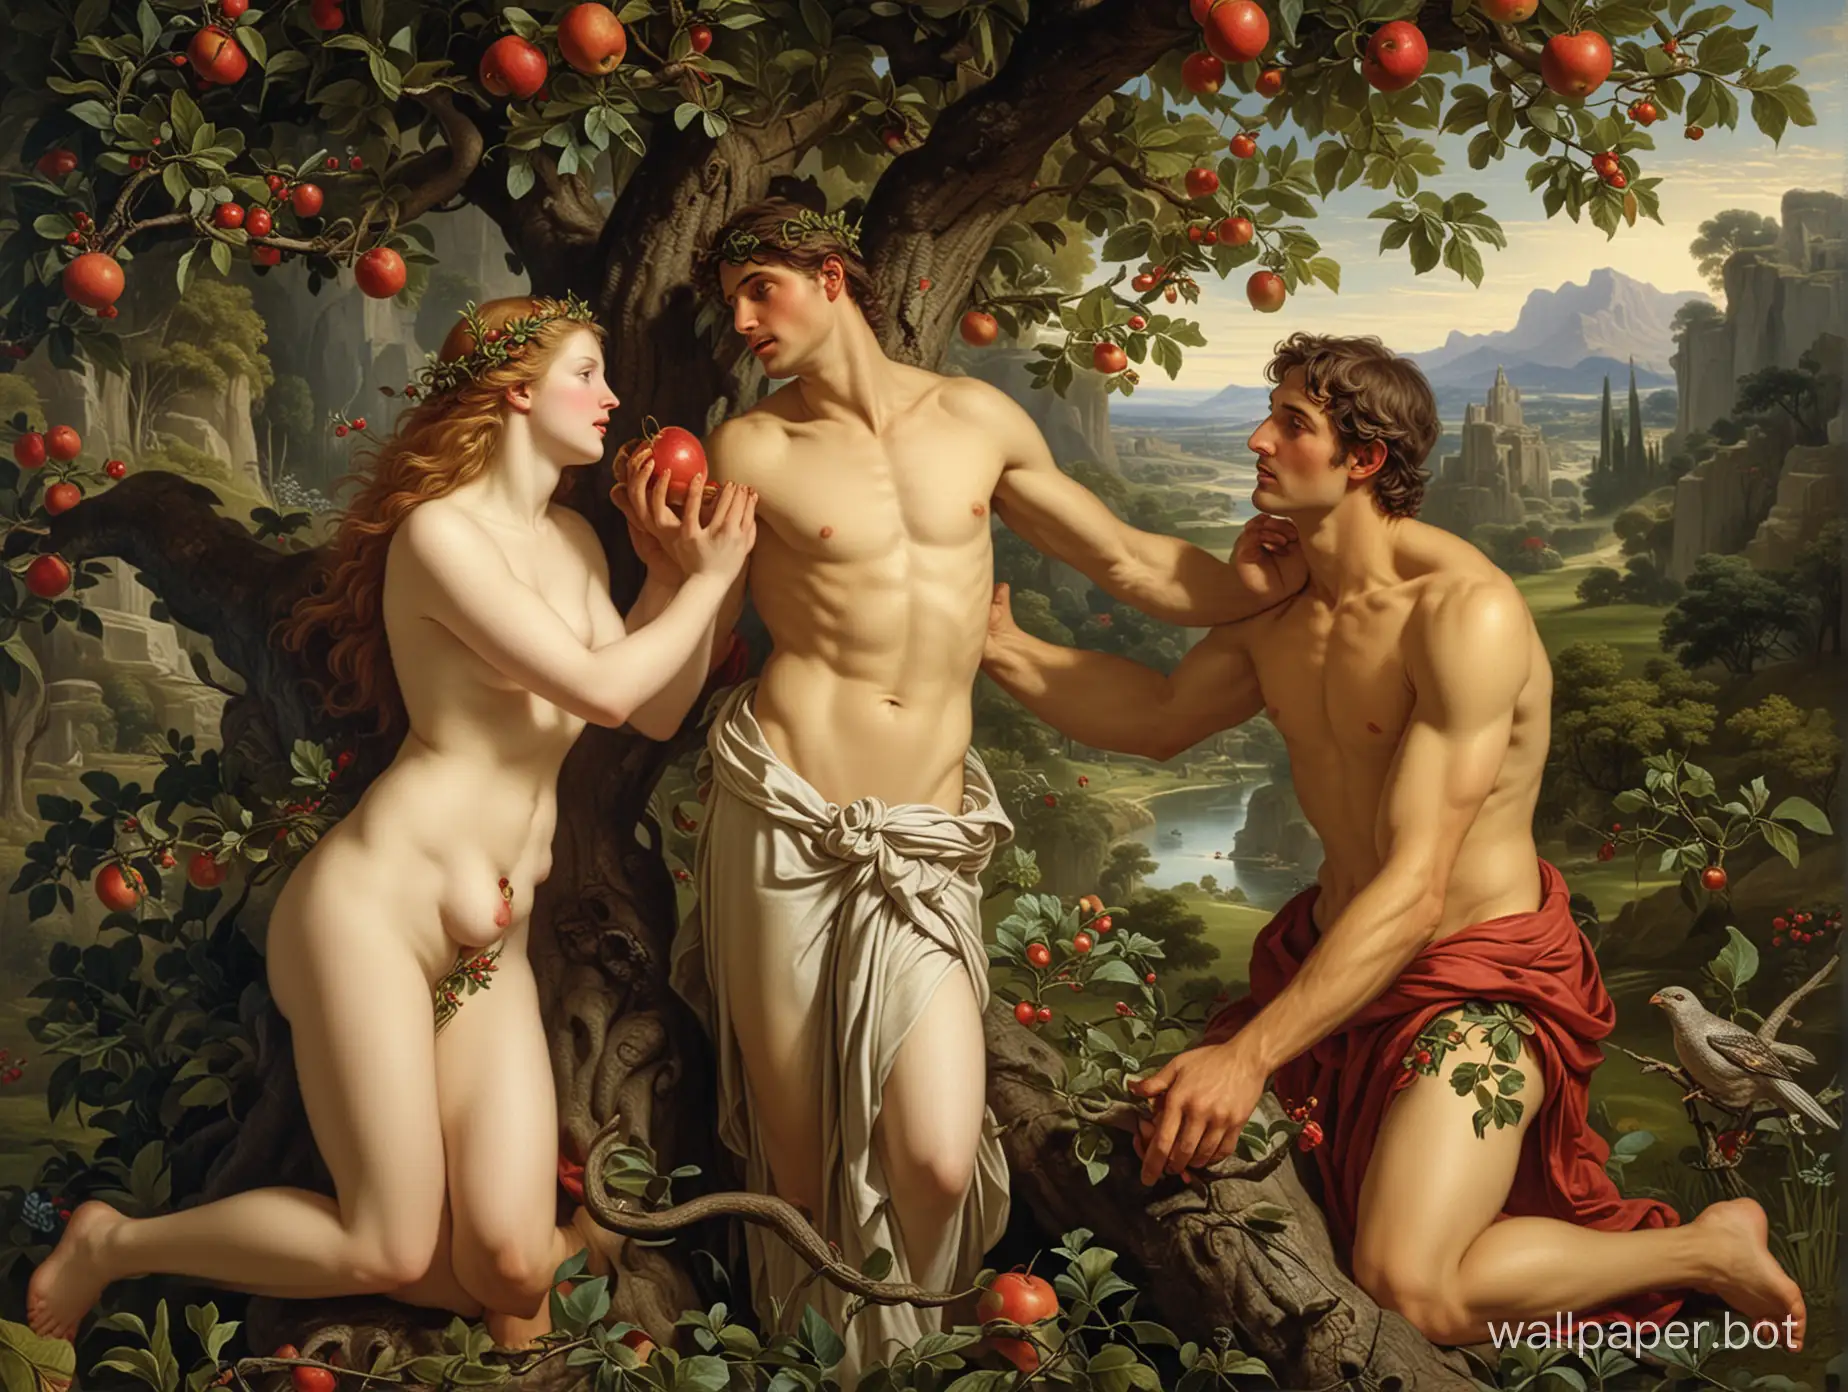 Eve tempting Adam with an apple in the beautiful lush Garden of Eden which looks like paradise, In a tree is the evil serpent, detailed features, sharp image